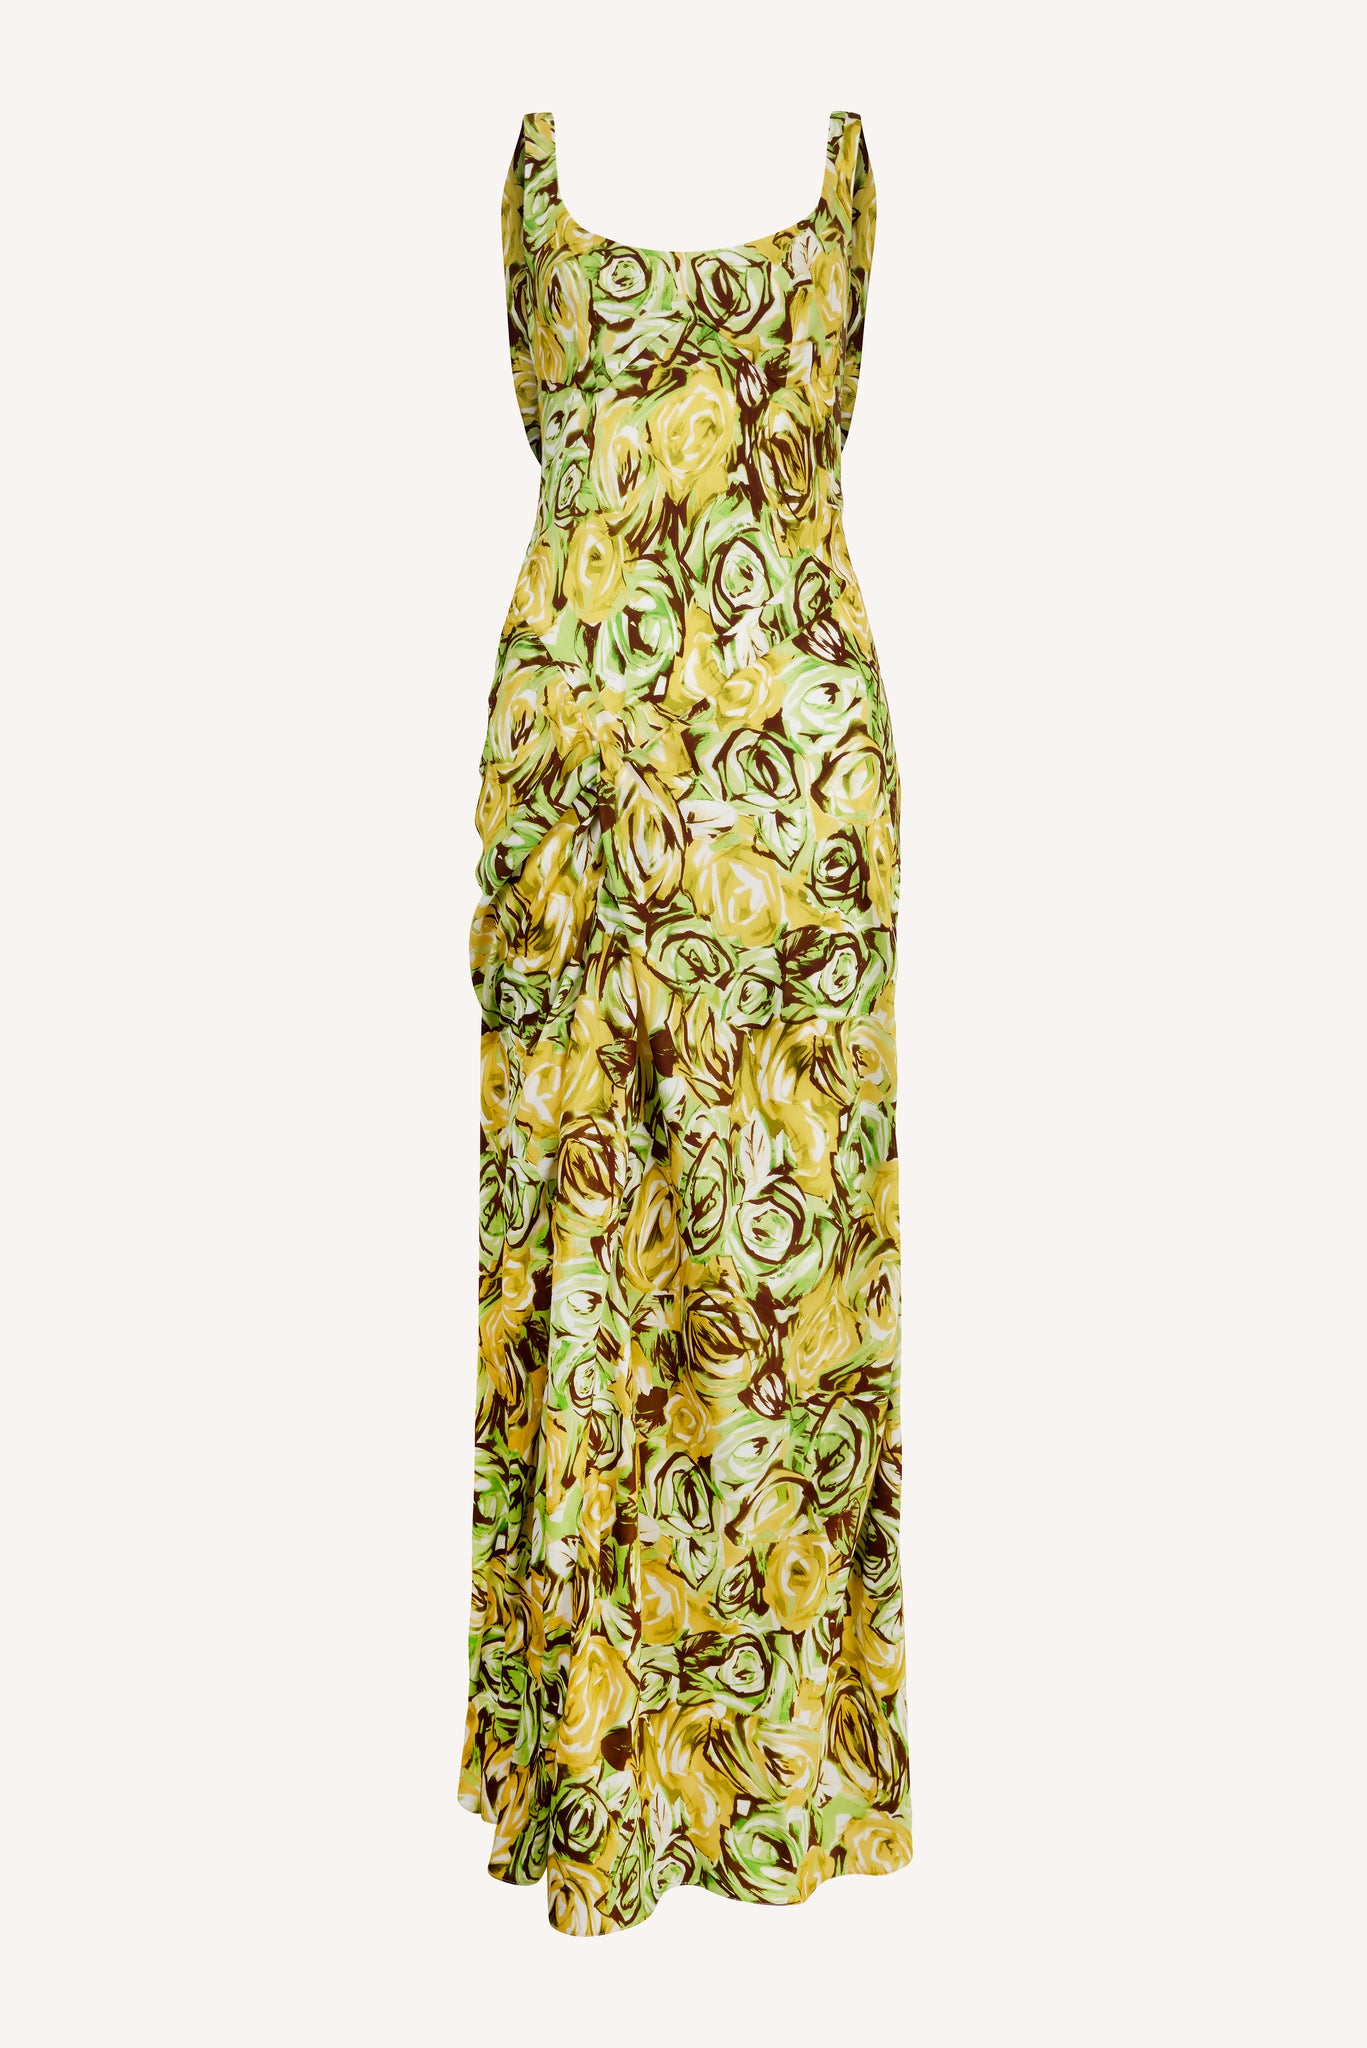 Barlow Dress In Abstract Green And Lemon Rose Printed Twill